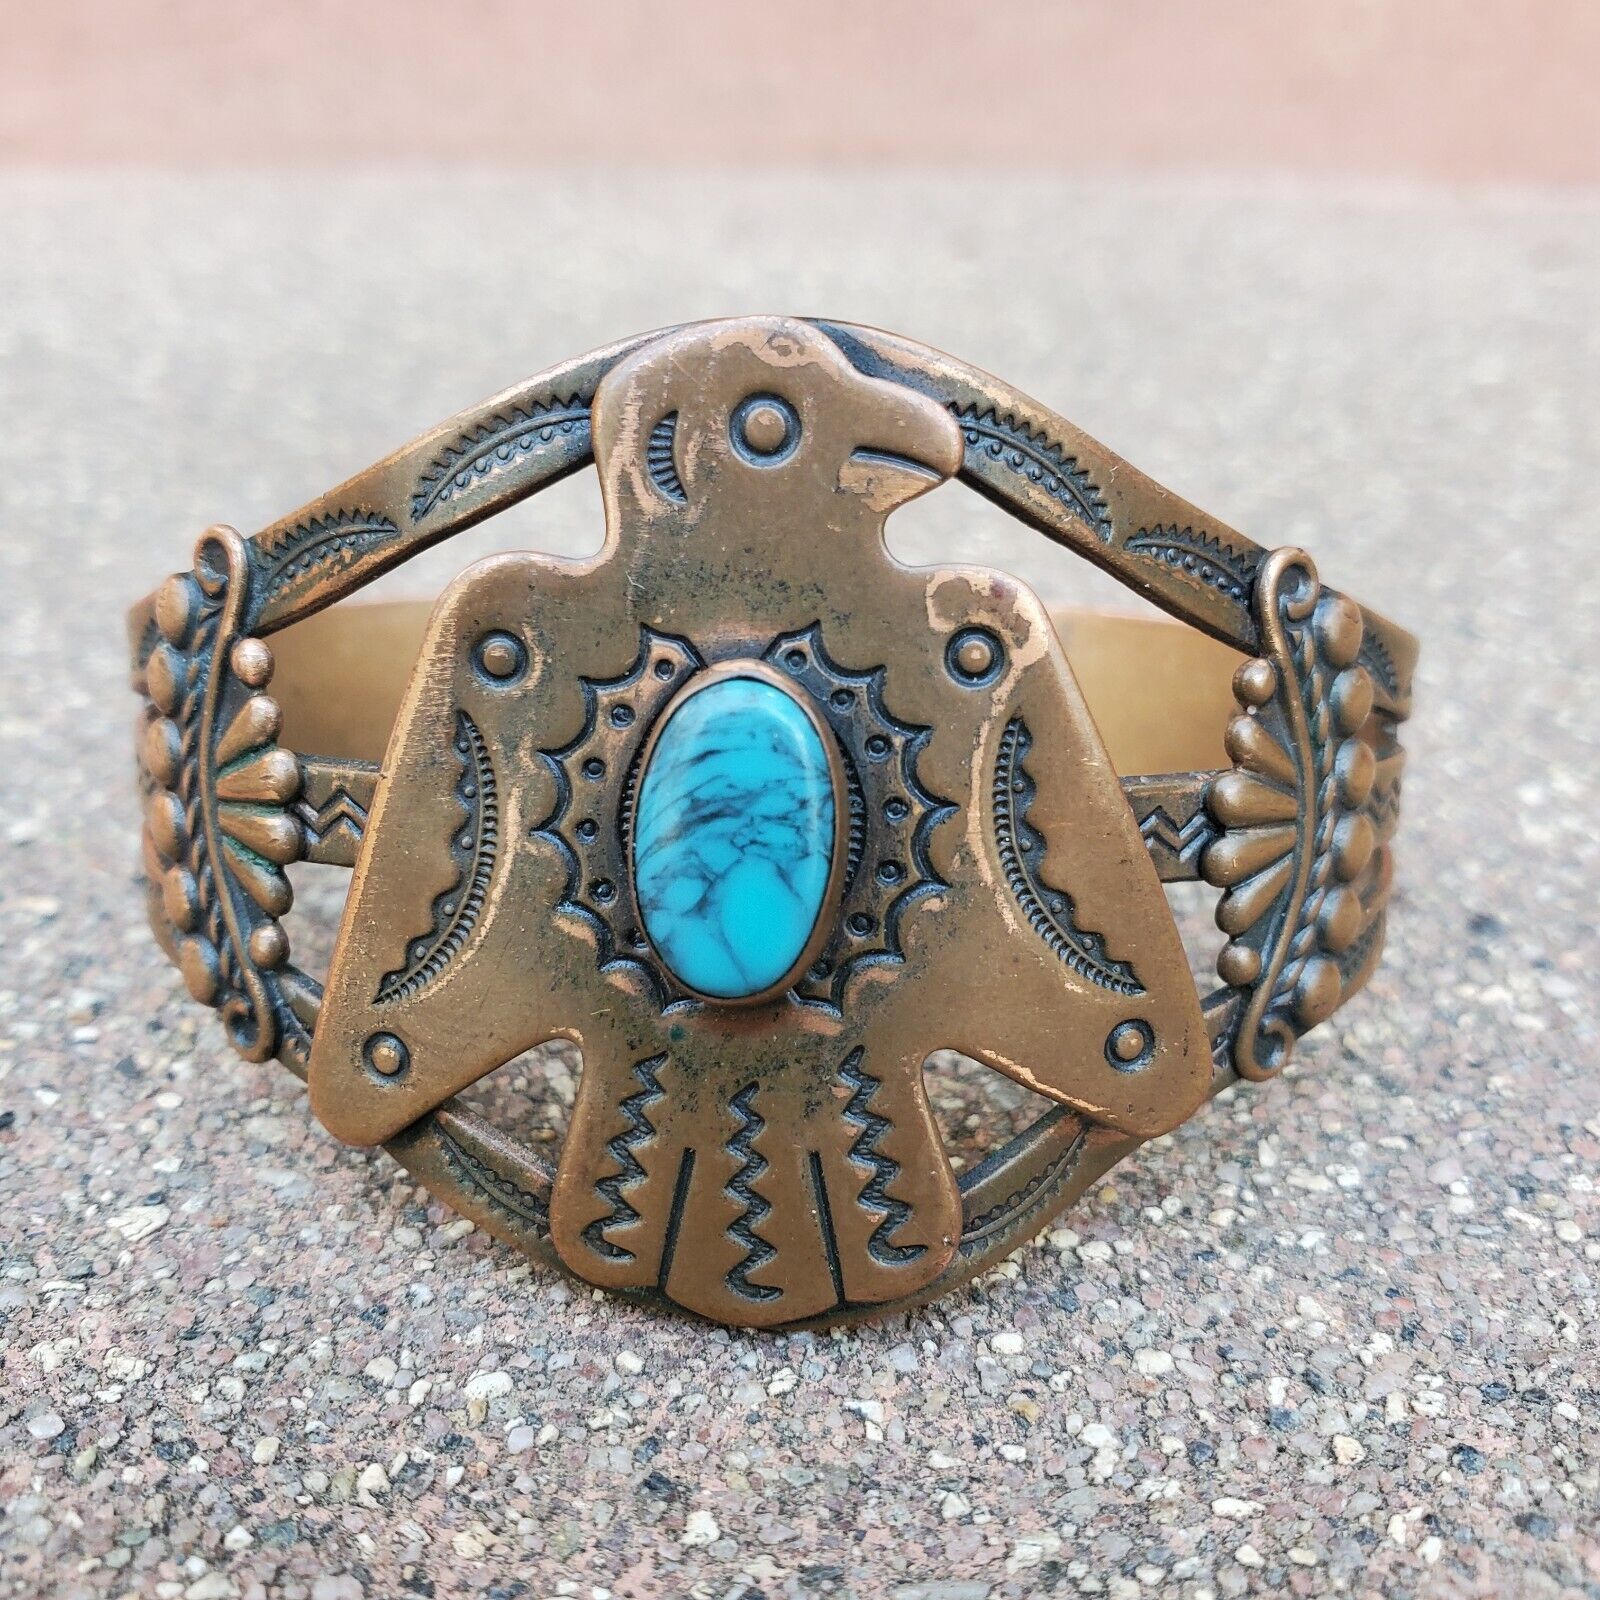 Vintage Copper Bell Trading Co. Metal Eagle Bracelet Cuff Faux Turquoise Jewelry